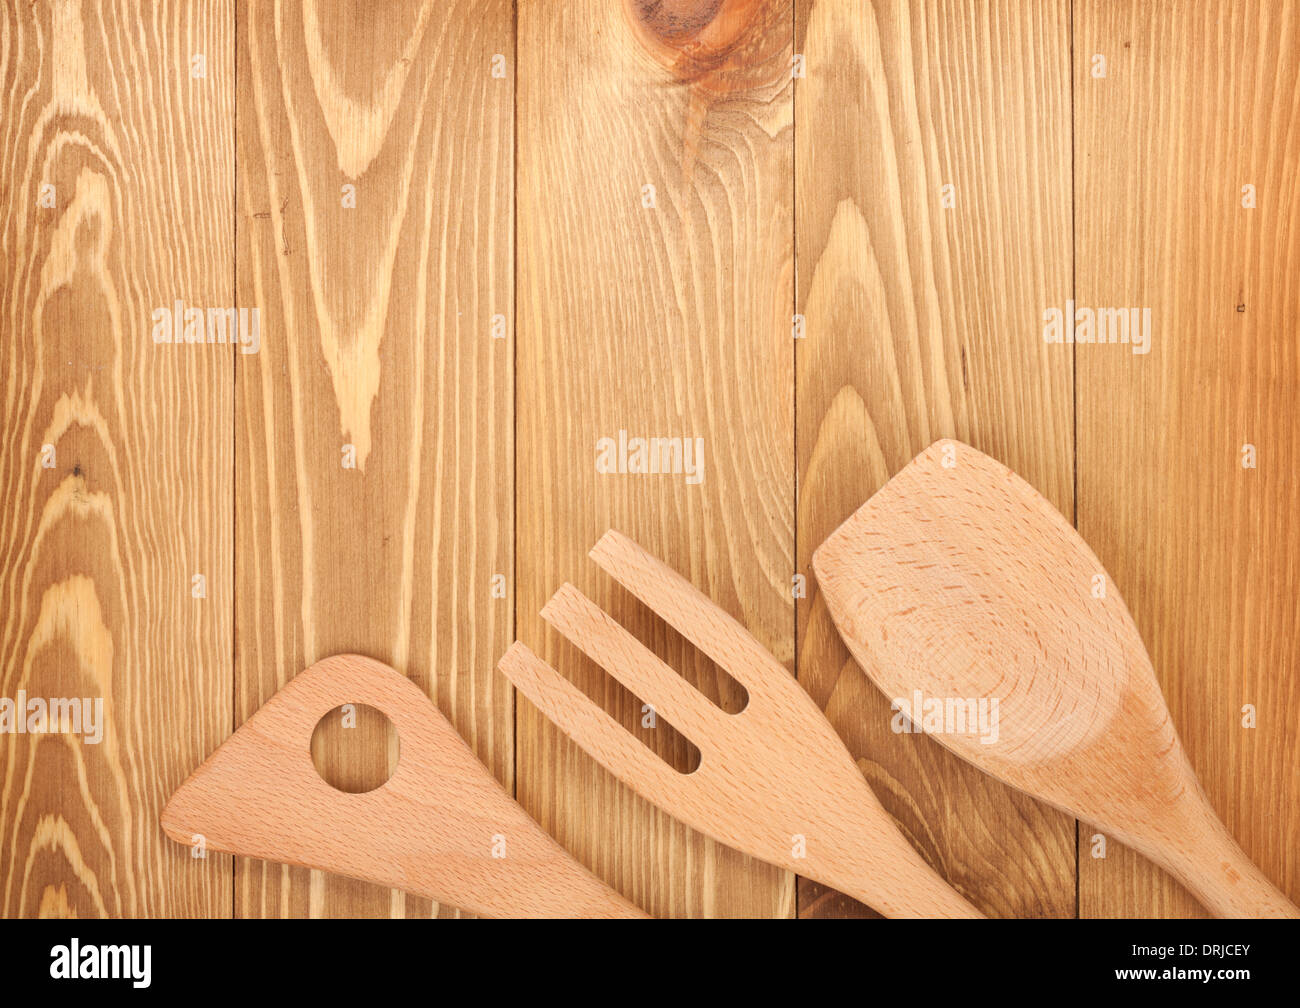 Kitchen Utensils On Wooden Table Background View From Above With